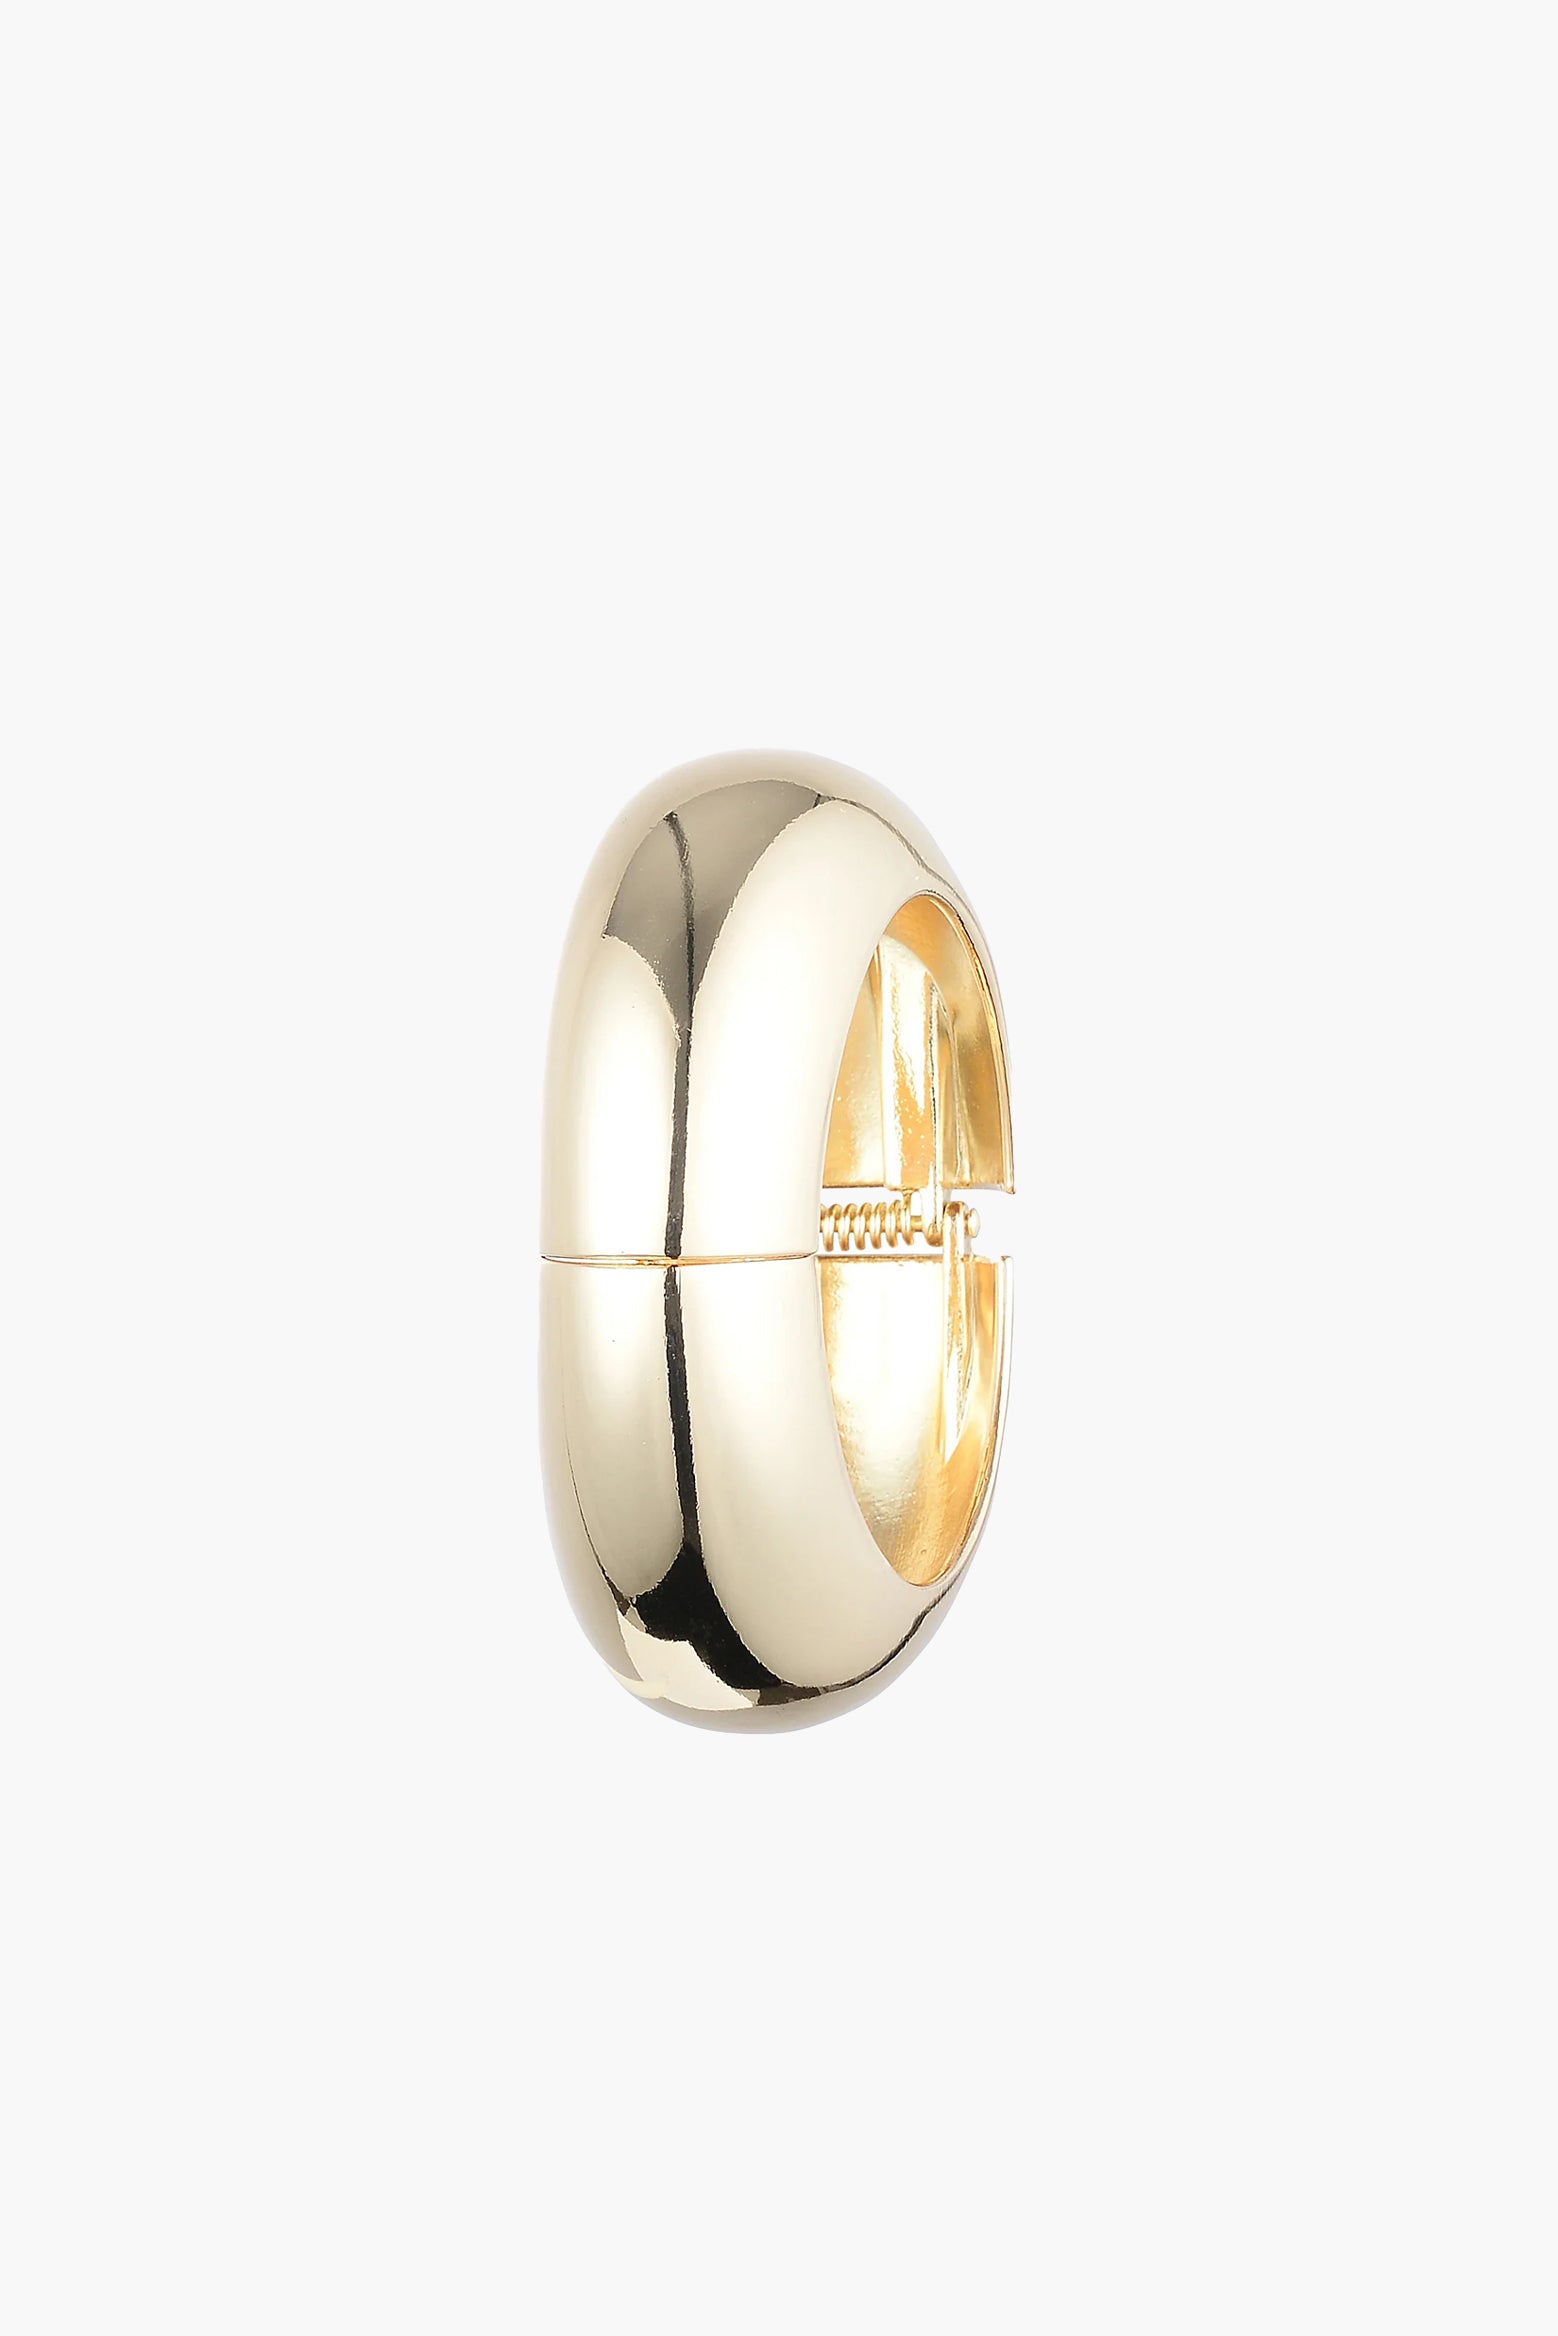 Anna Rossi Illusion Bangle in Gold available at The New Trend Australia. 